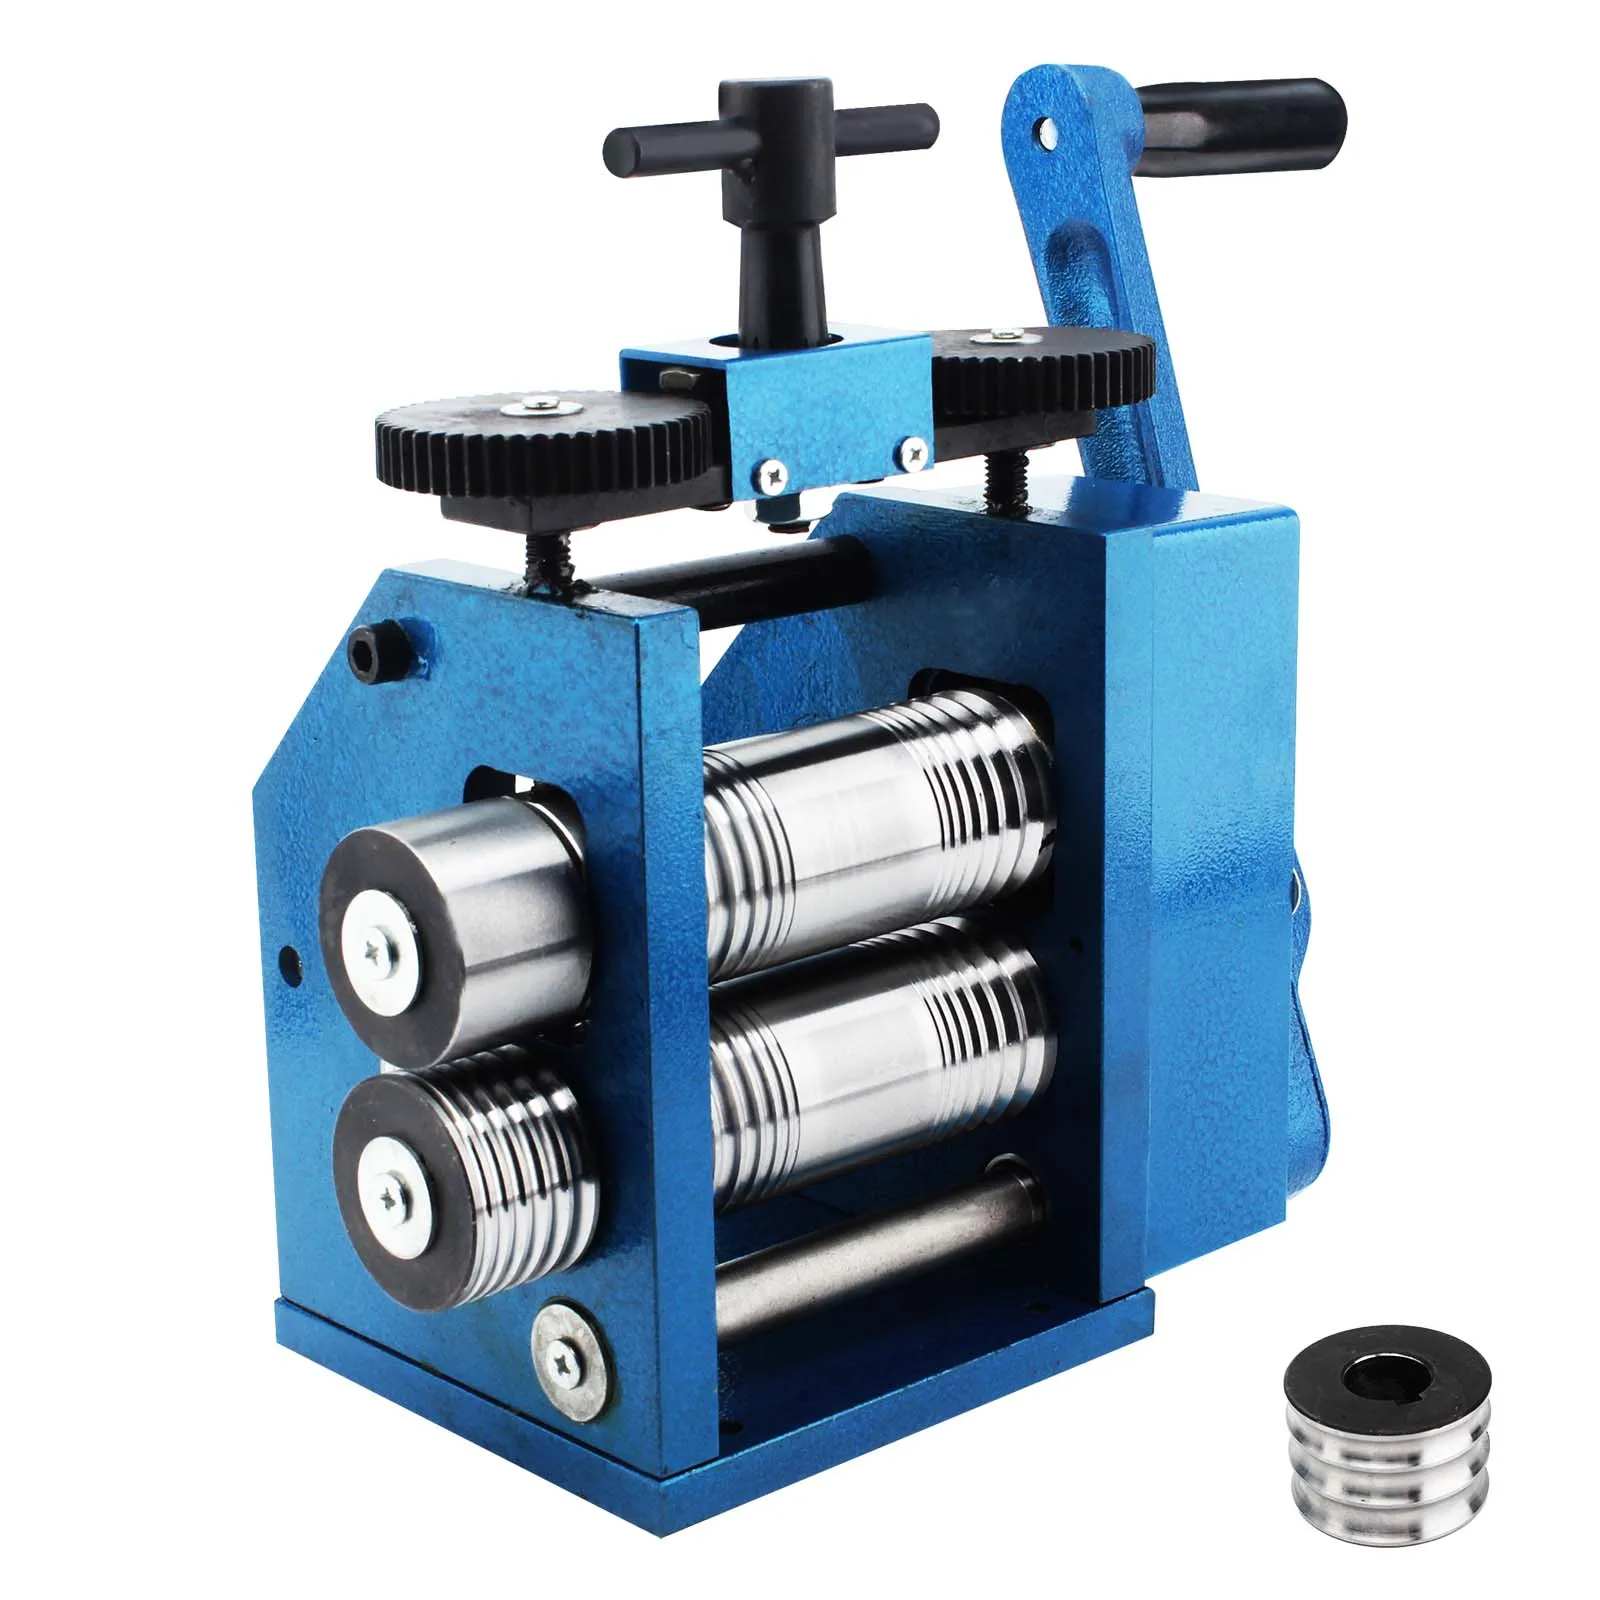 

Jewelry Rolling Mill Machine Gear Ratio 1:2.5 Wire Roller Mill 0.1-7mm Press Thickness Manual Combination Rolling Mill for Metal